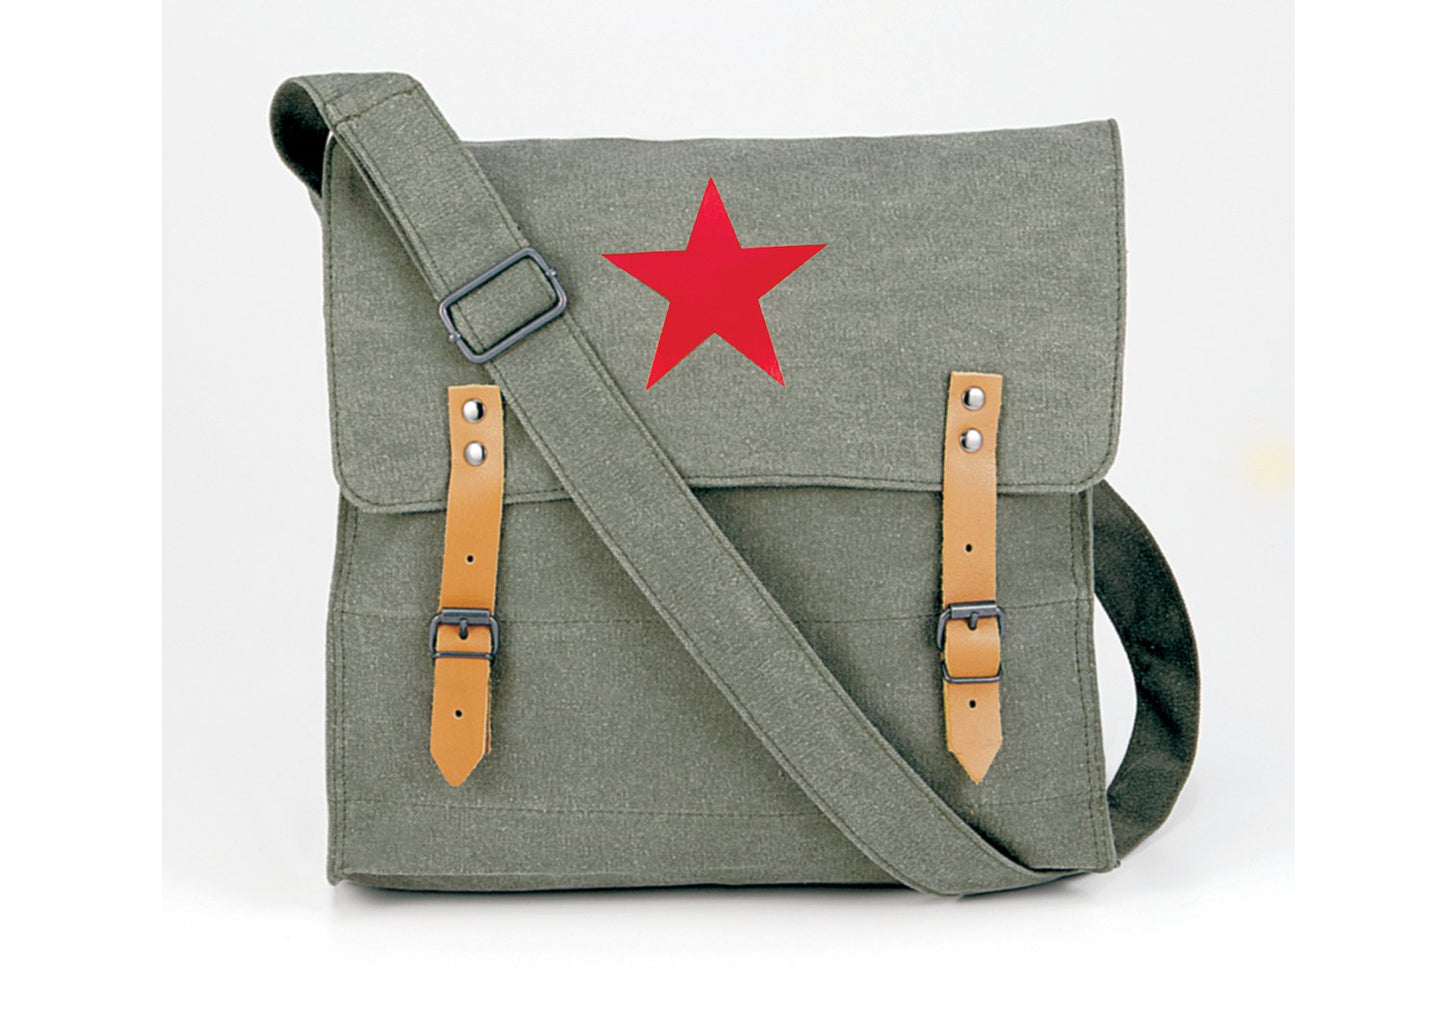 Canvas Classic Bag with Medic Star